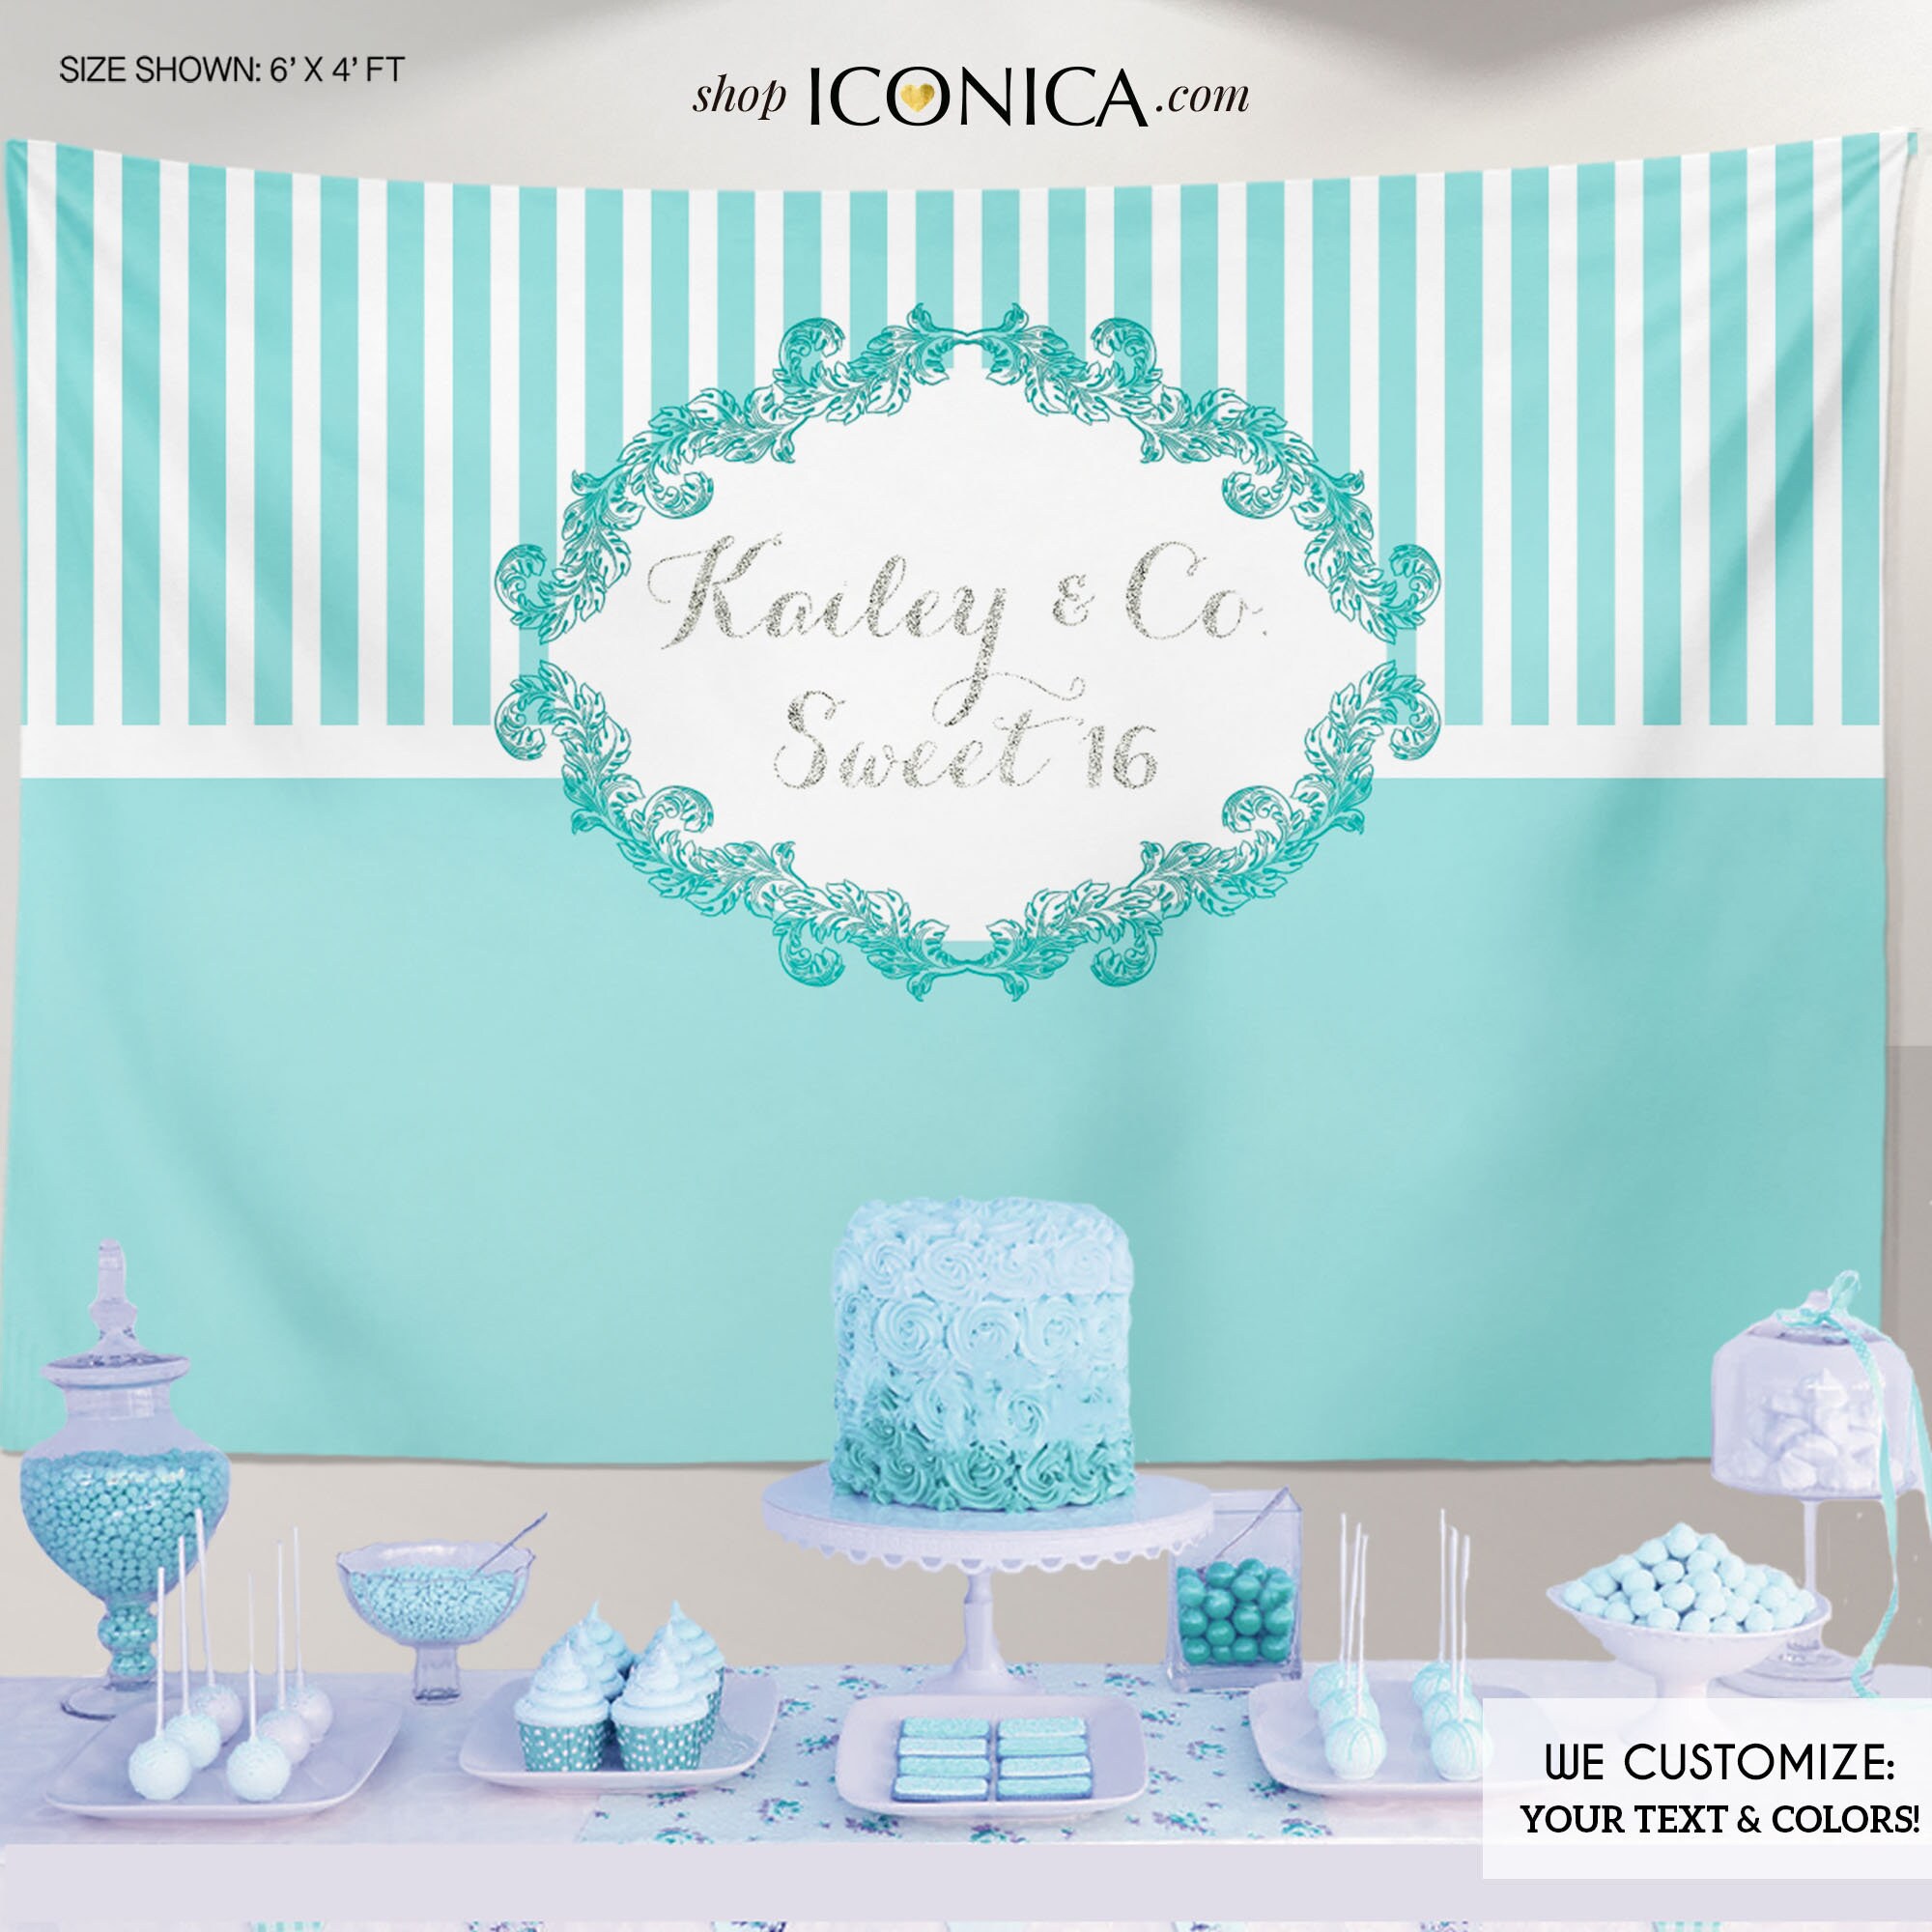 Aqua & Teal Party Backdrop, Elegant Banner, Silver Glittter, Sweet Sixteen Any Event, Color, Printed Or Printable File